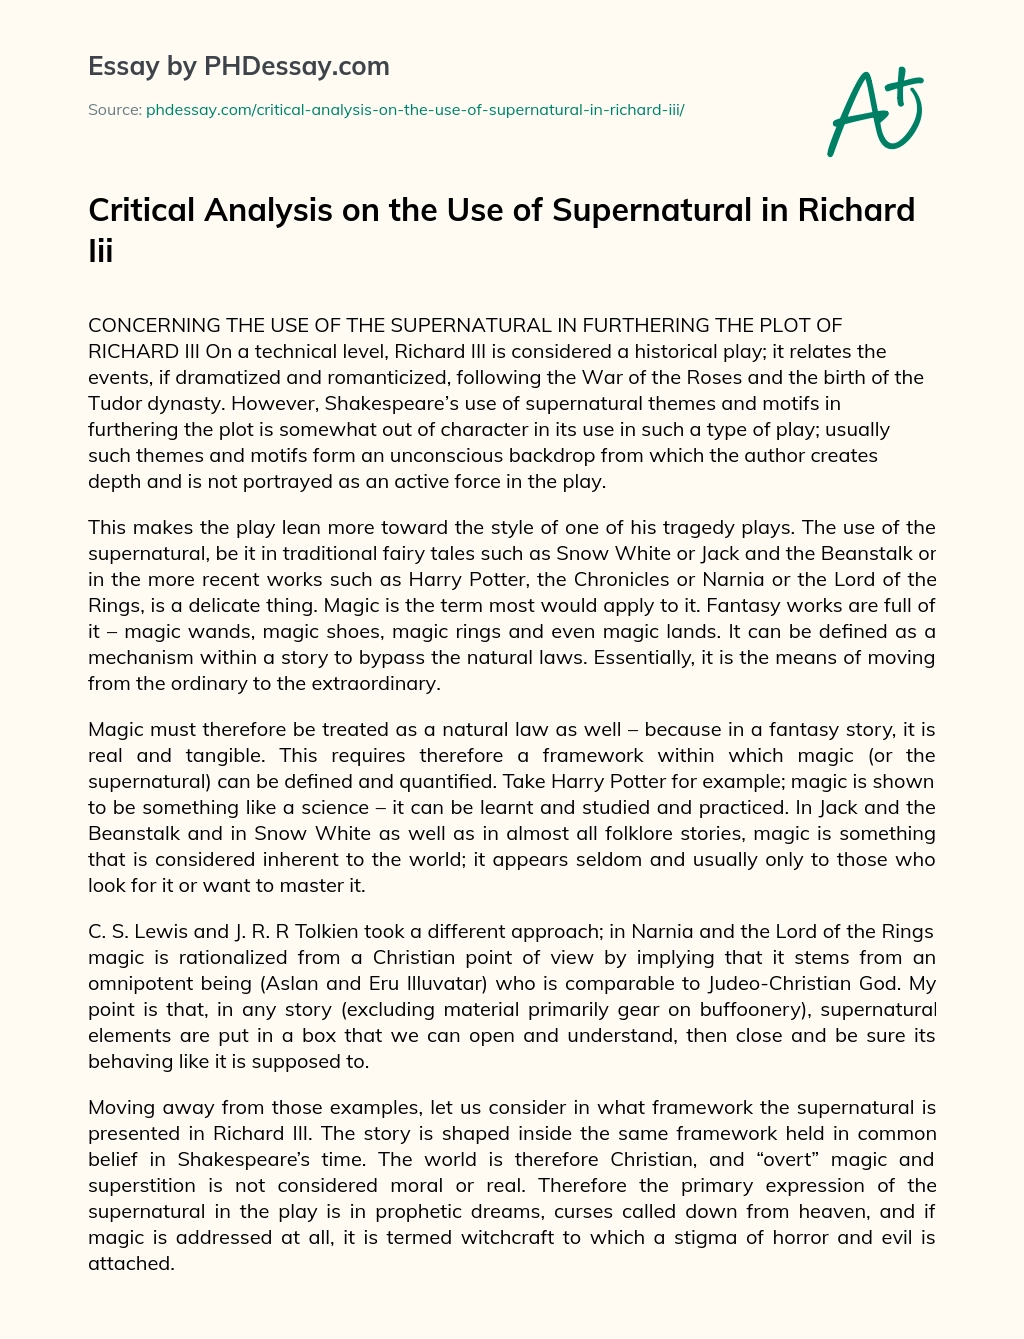 Critical Analysis on the Use of Supernatural in Richard III essay